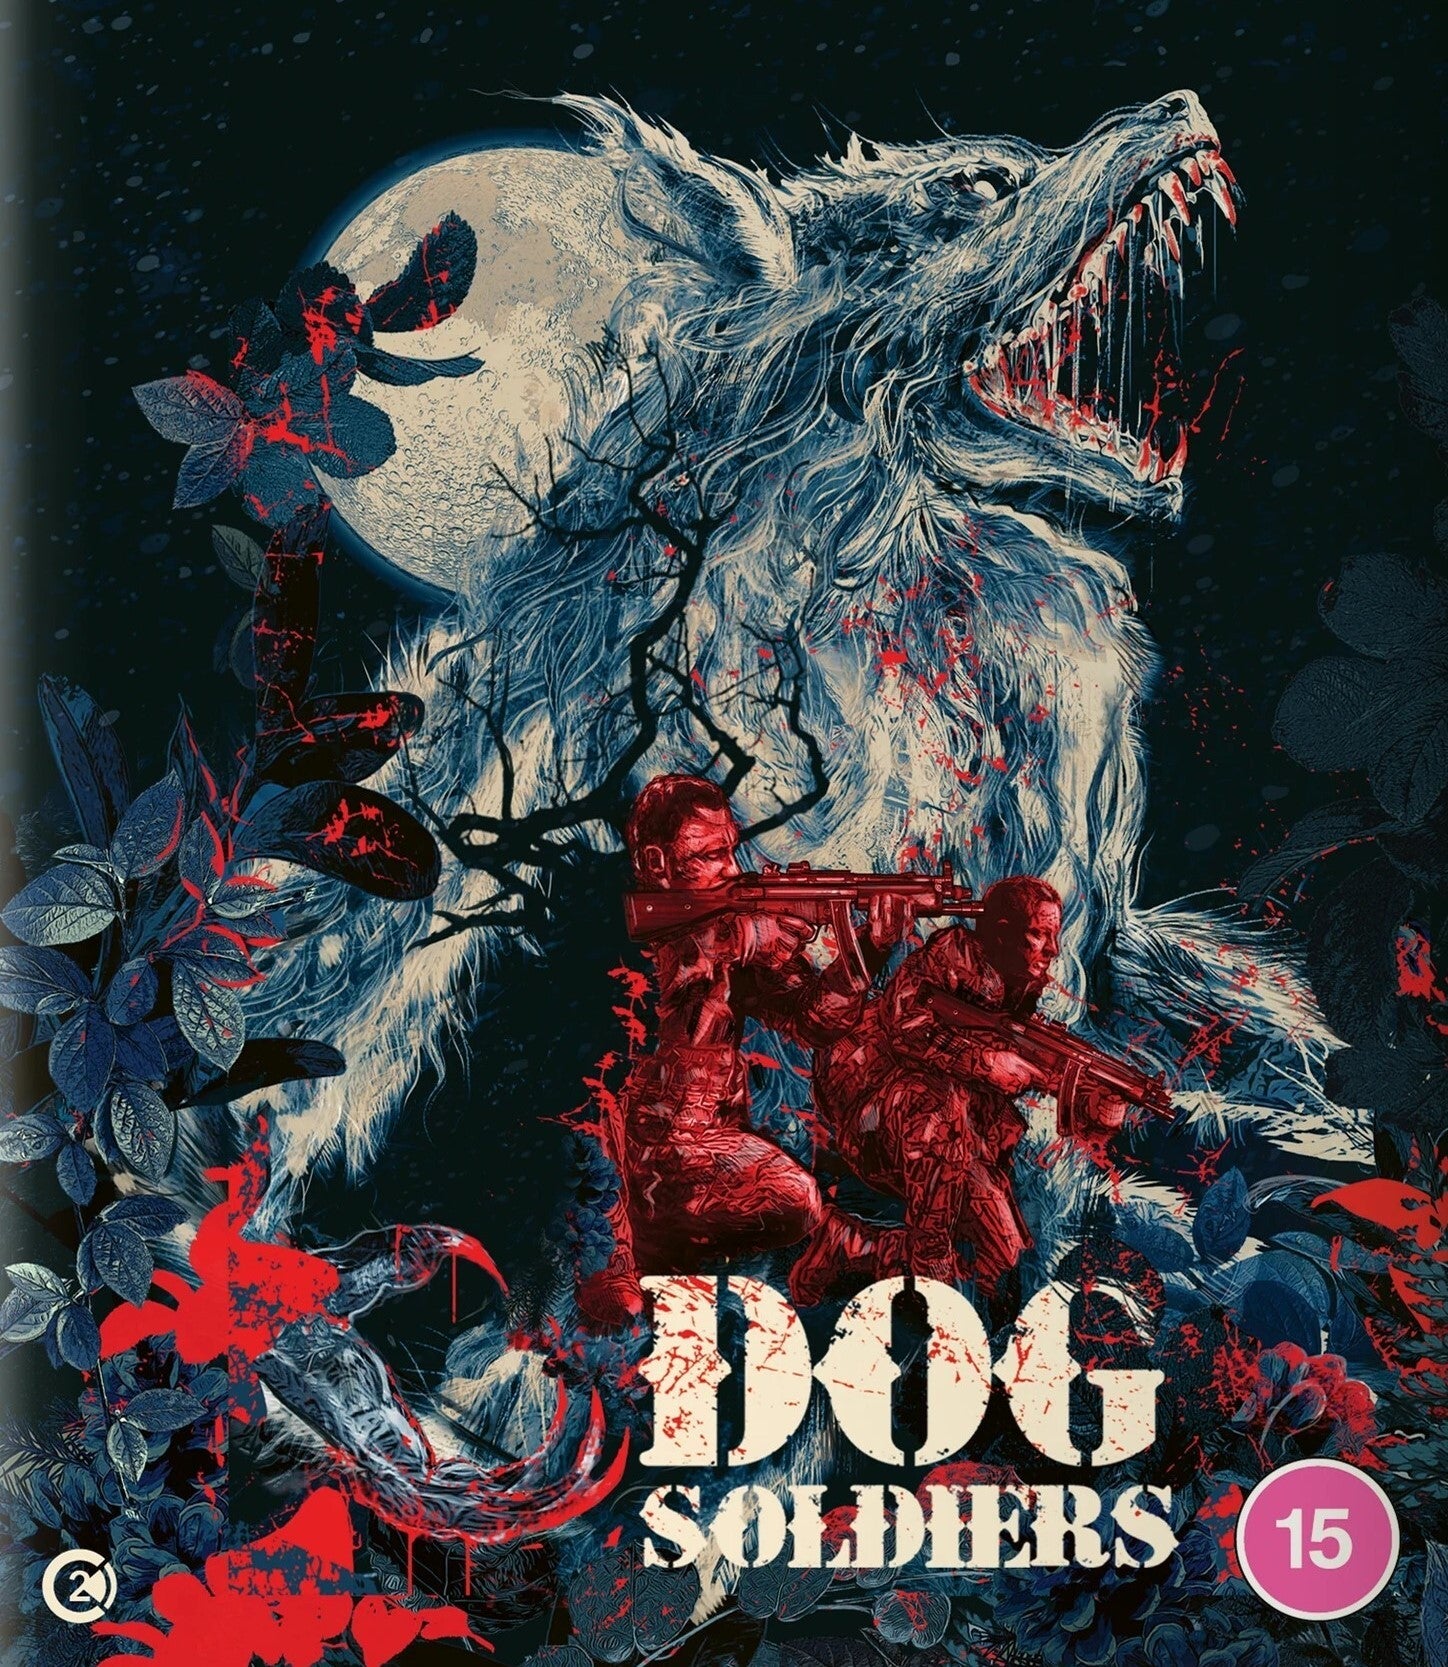 DOG SOLDIERS (REGION FREE/B IMPORT - LIMITED EDITION) 4K UHD/BLU-RAY [SCRATCH AND DENT]